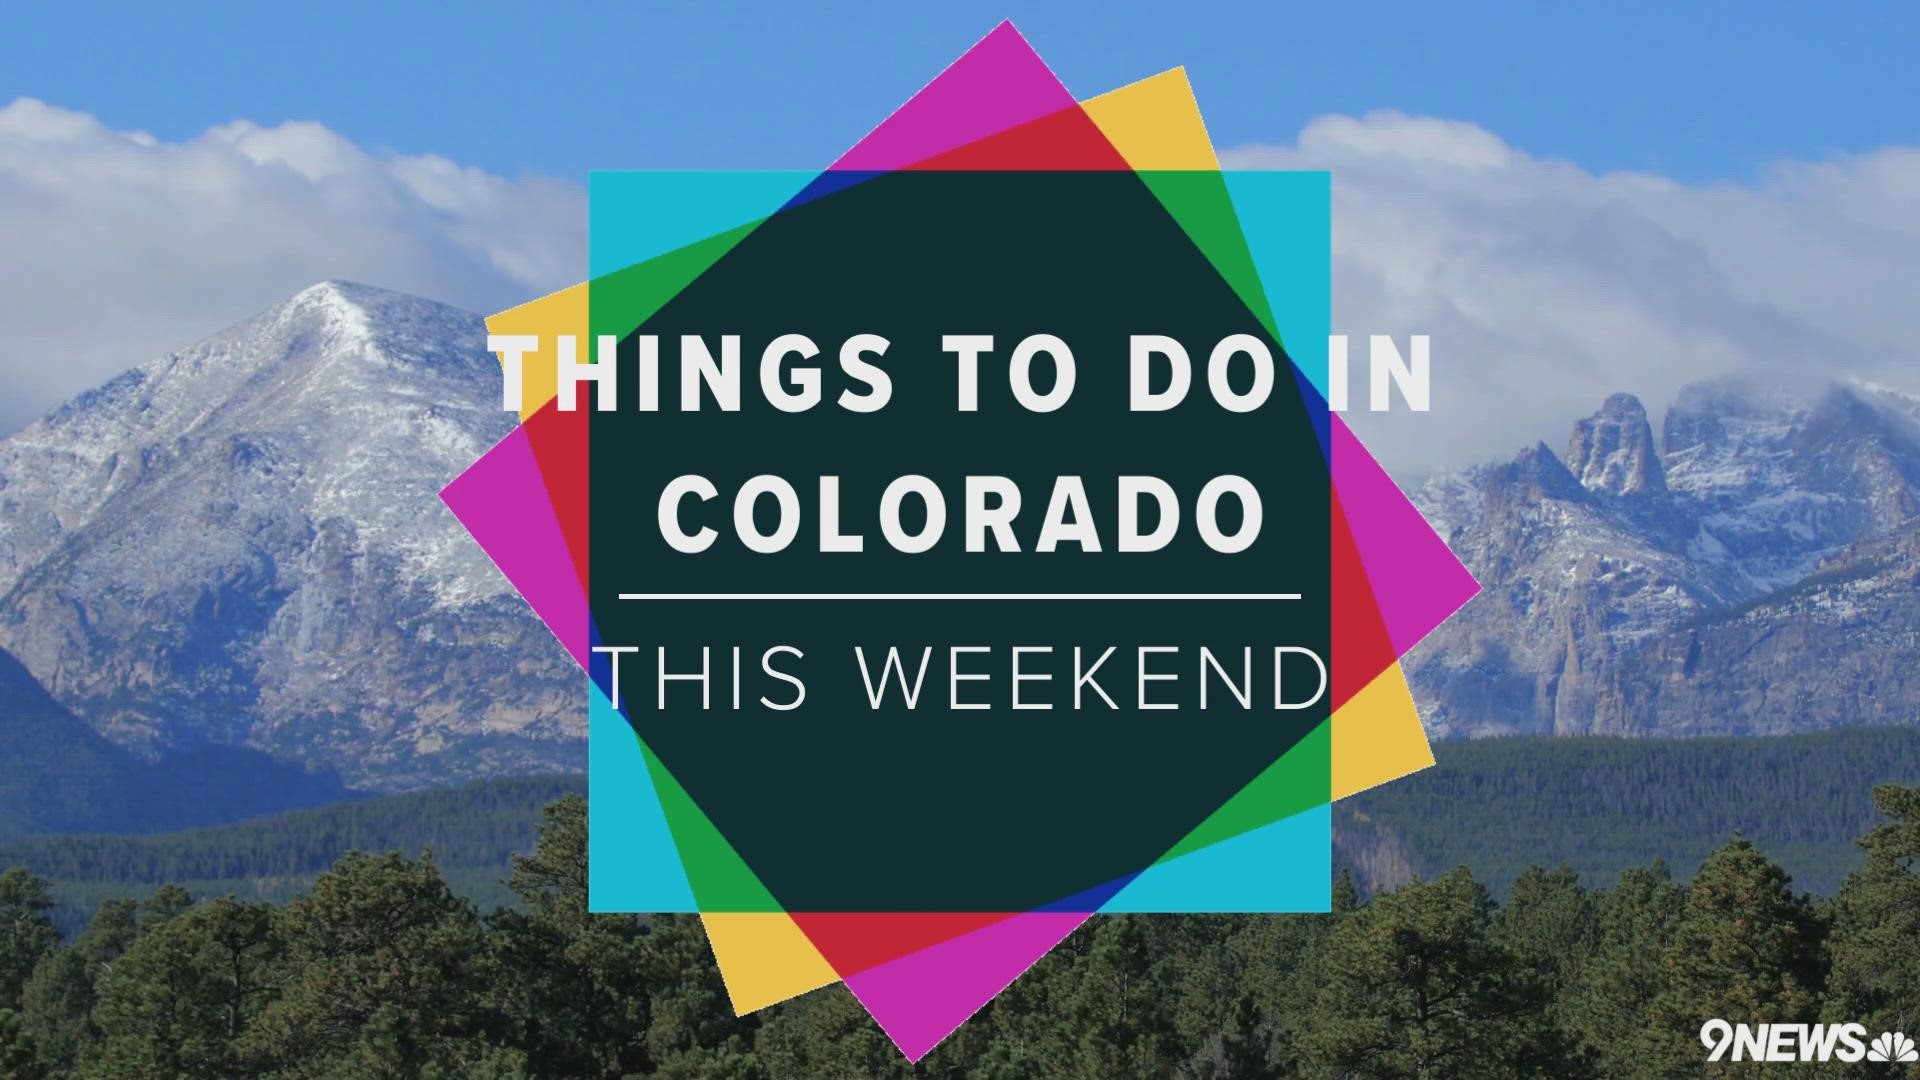 Here are 9 things to do in Colorado this weekend, August 5-7.